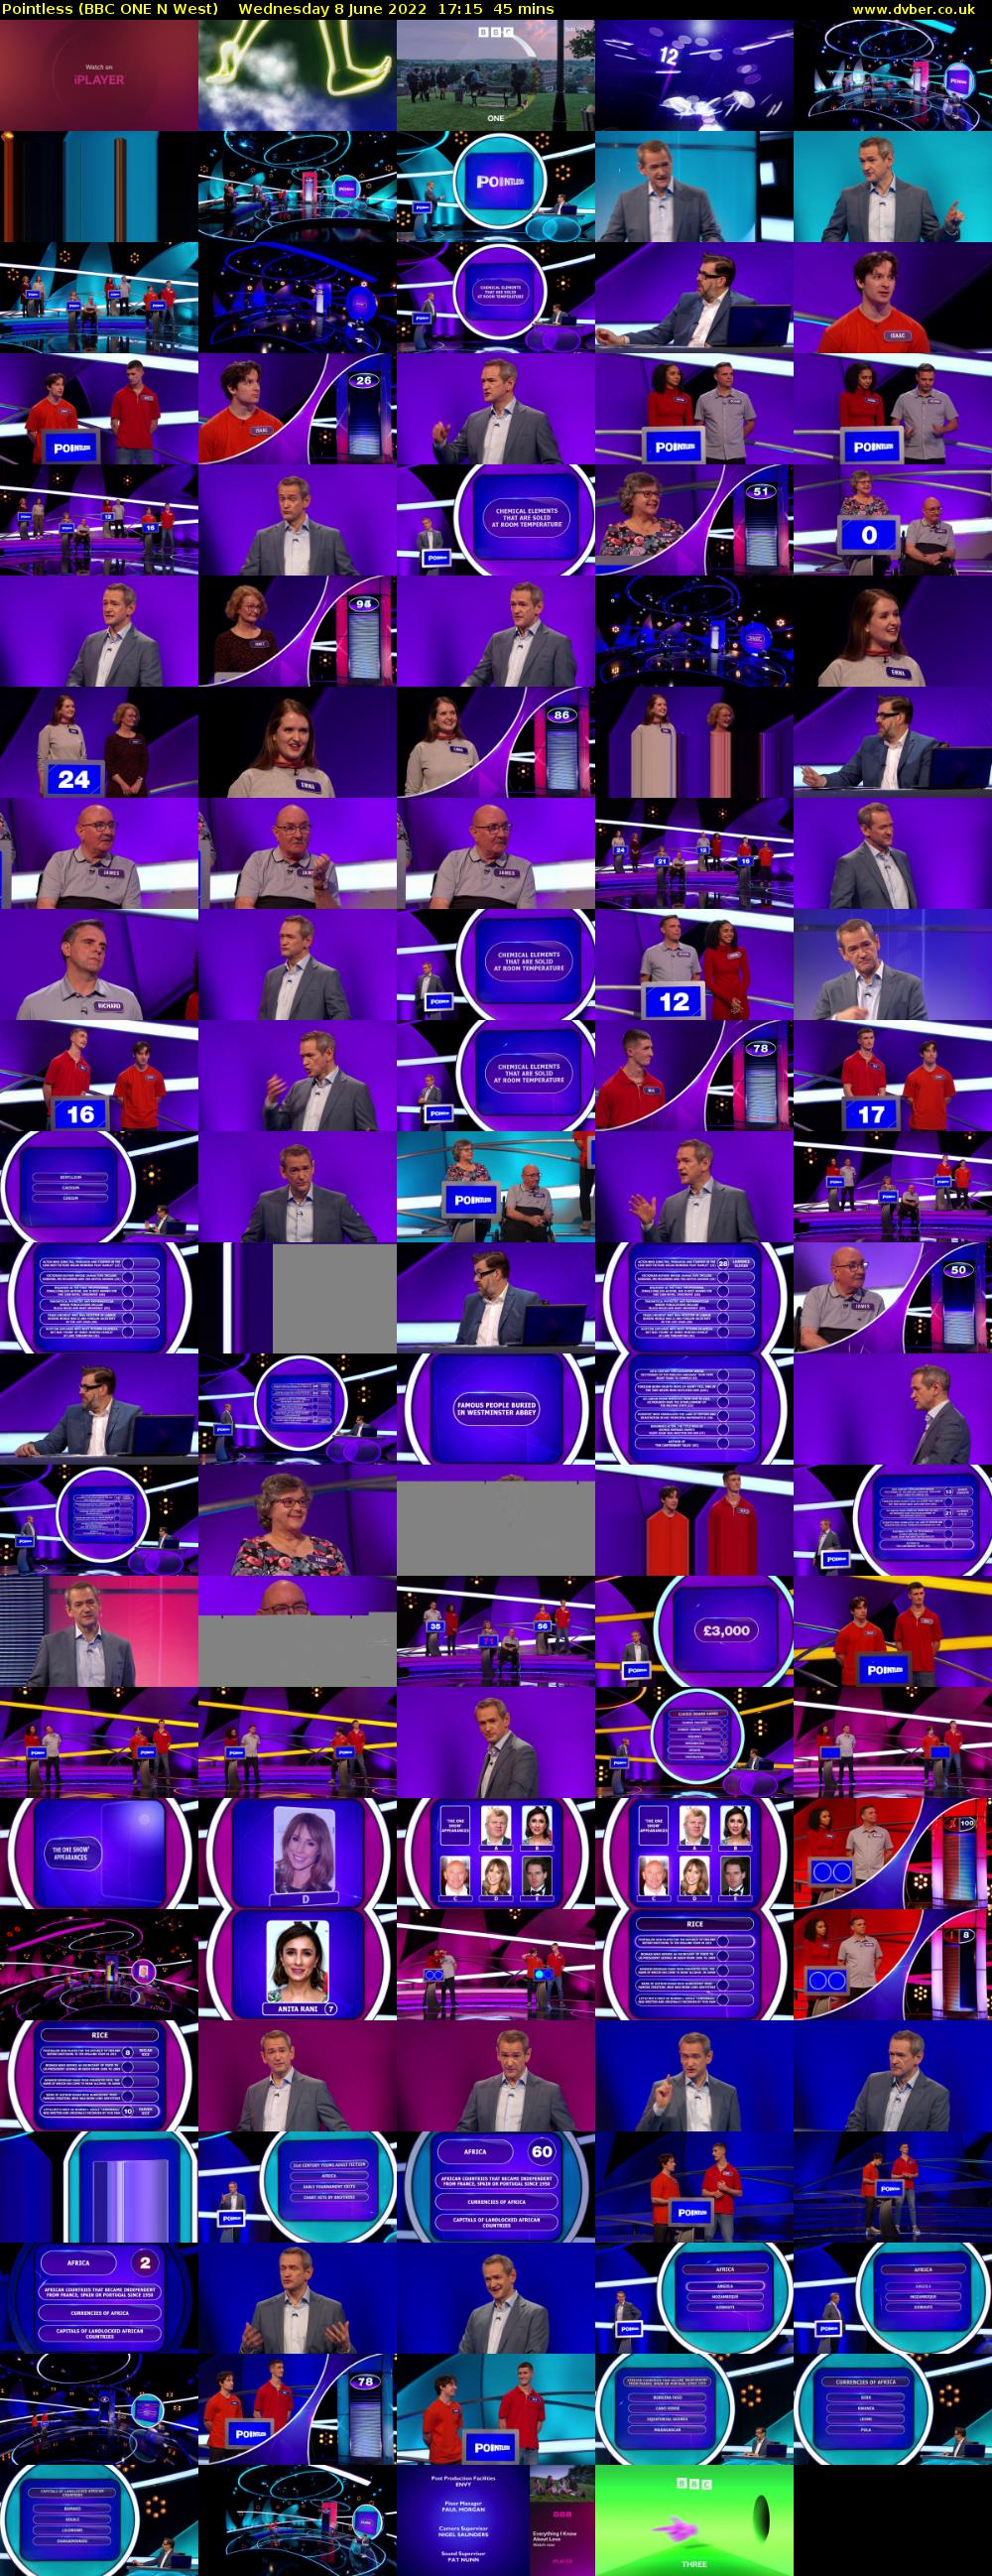 Pointless (BBC ONE N West) Wednesday 8 June 2022 17:15 - 18:00